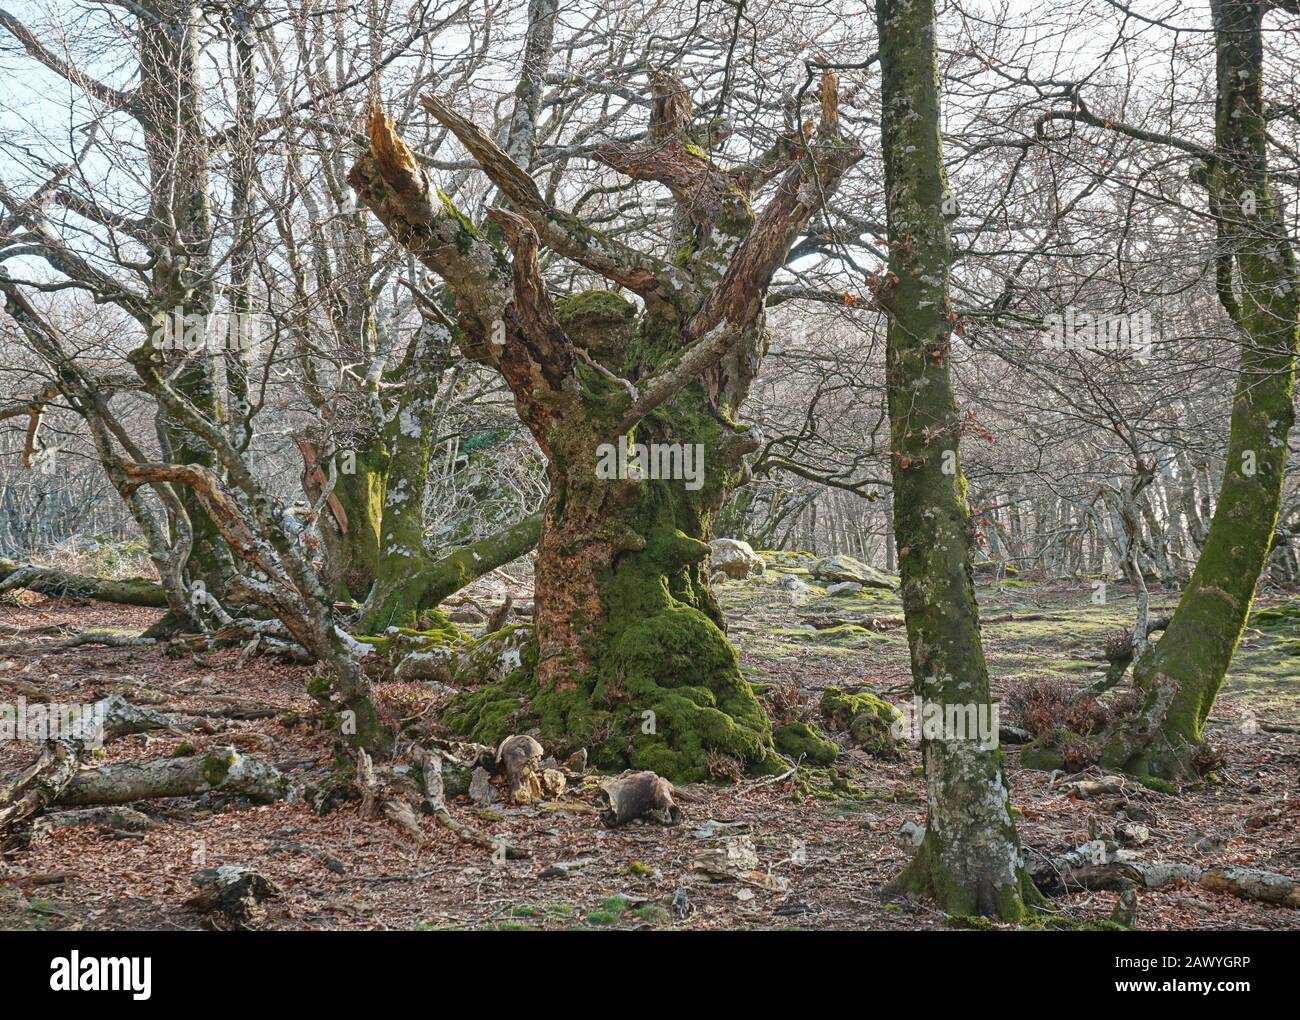 Mysterious old dead tree trunk in the forest, natural scene, France, Massif des Alberes, Pyrenees Orientales, Occitanie Stock Photo